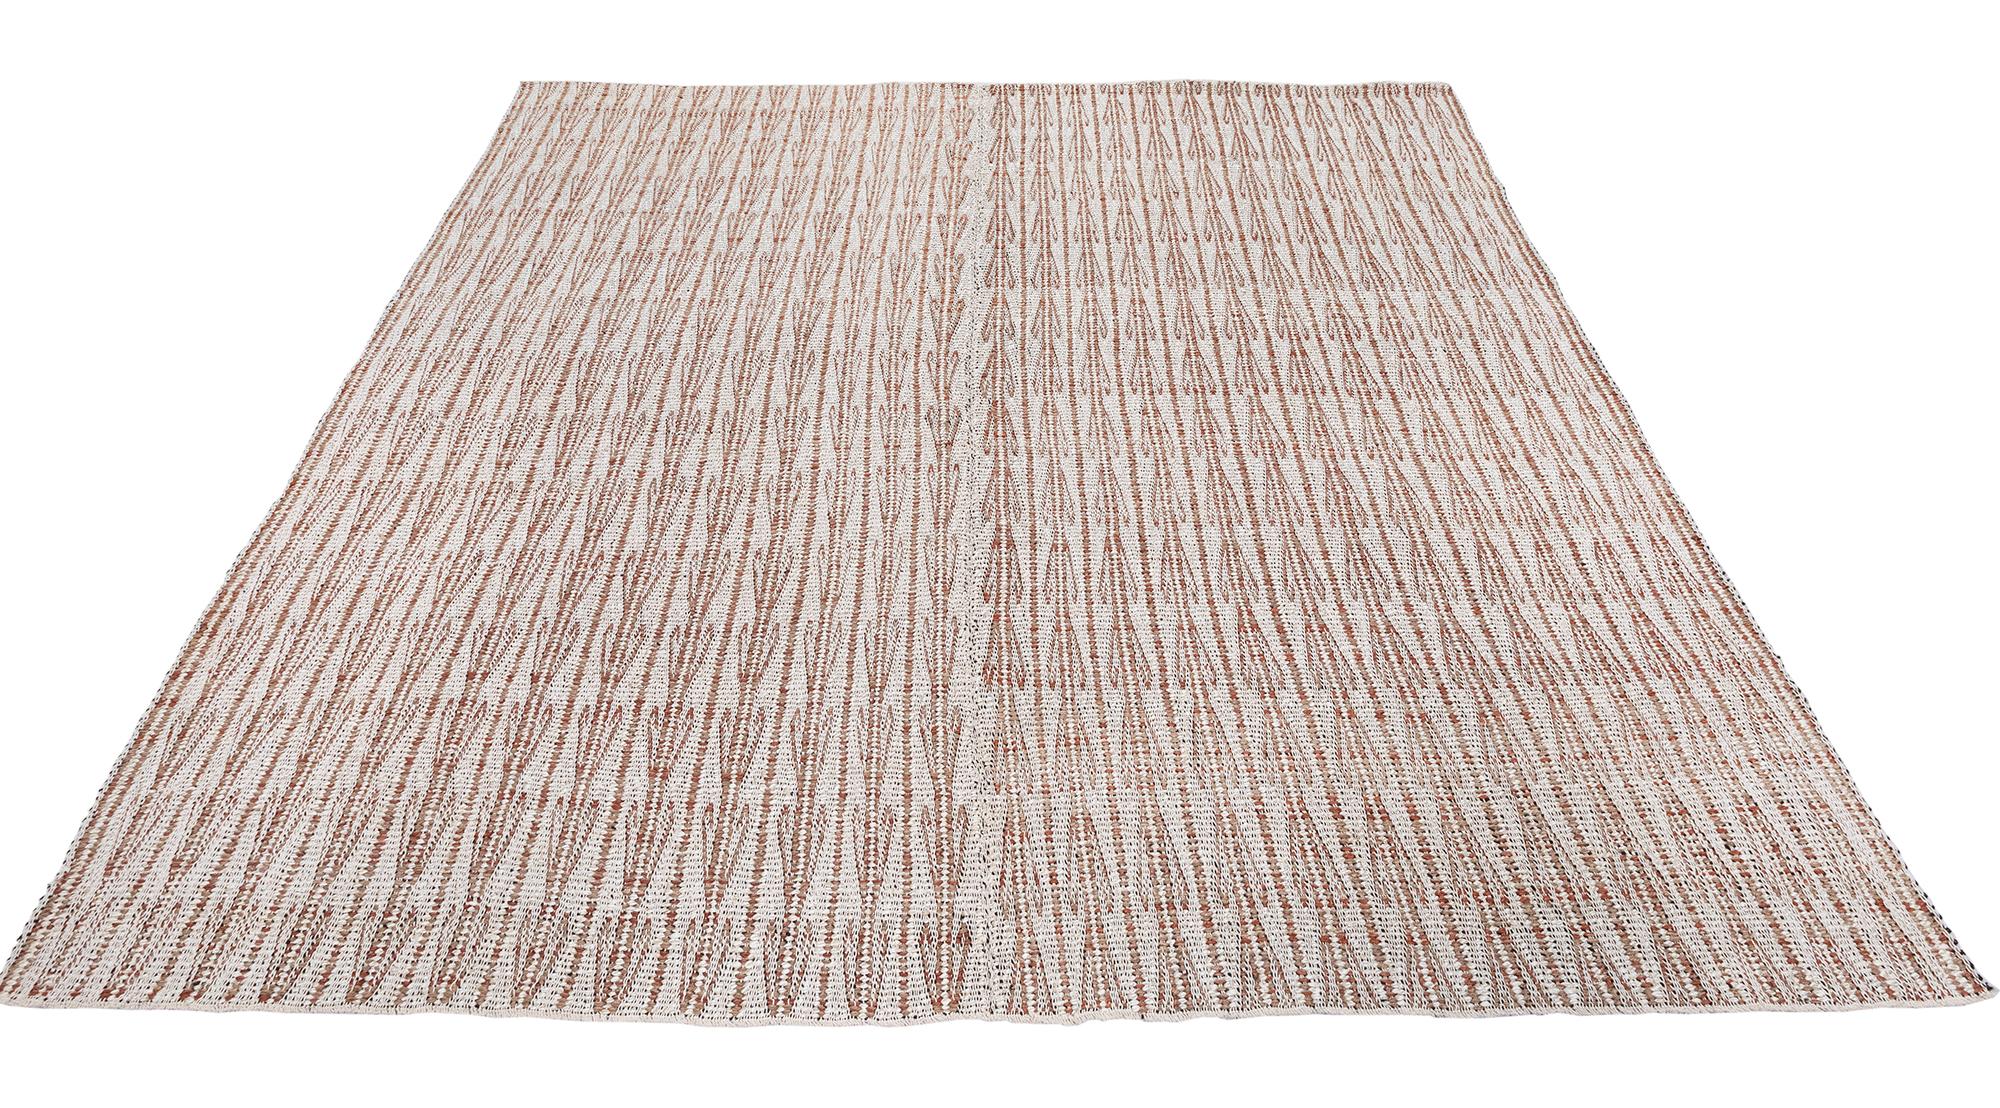 Ricci Tribal Flatweave Rug In New Condition For Sale In New York, NY